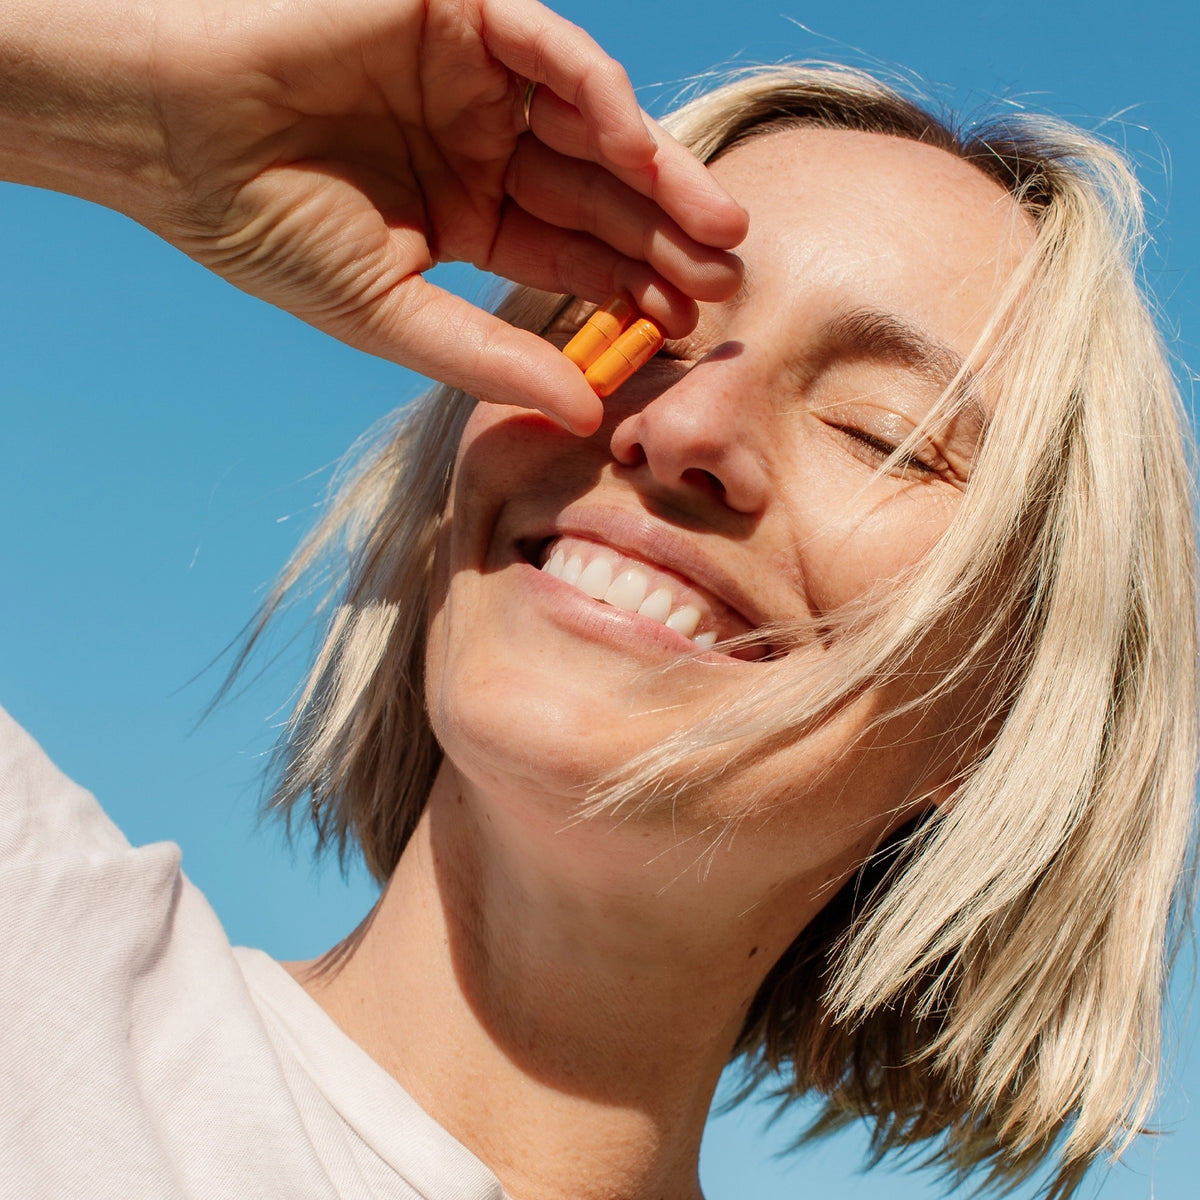 Woman smiling while holding THE FULLEST Kinder Thoughts supplement capsule between her fingers against a clear blue sky.